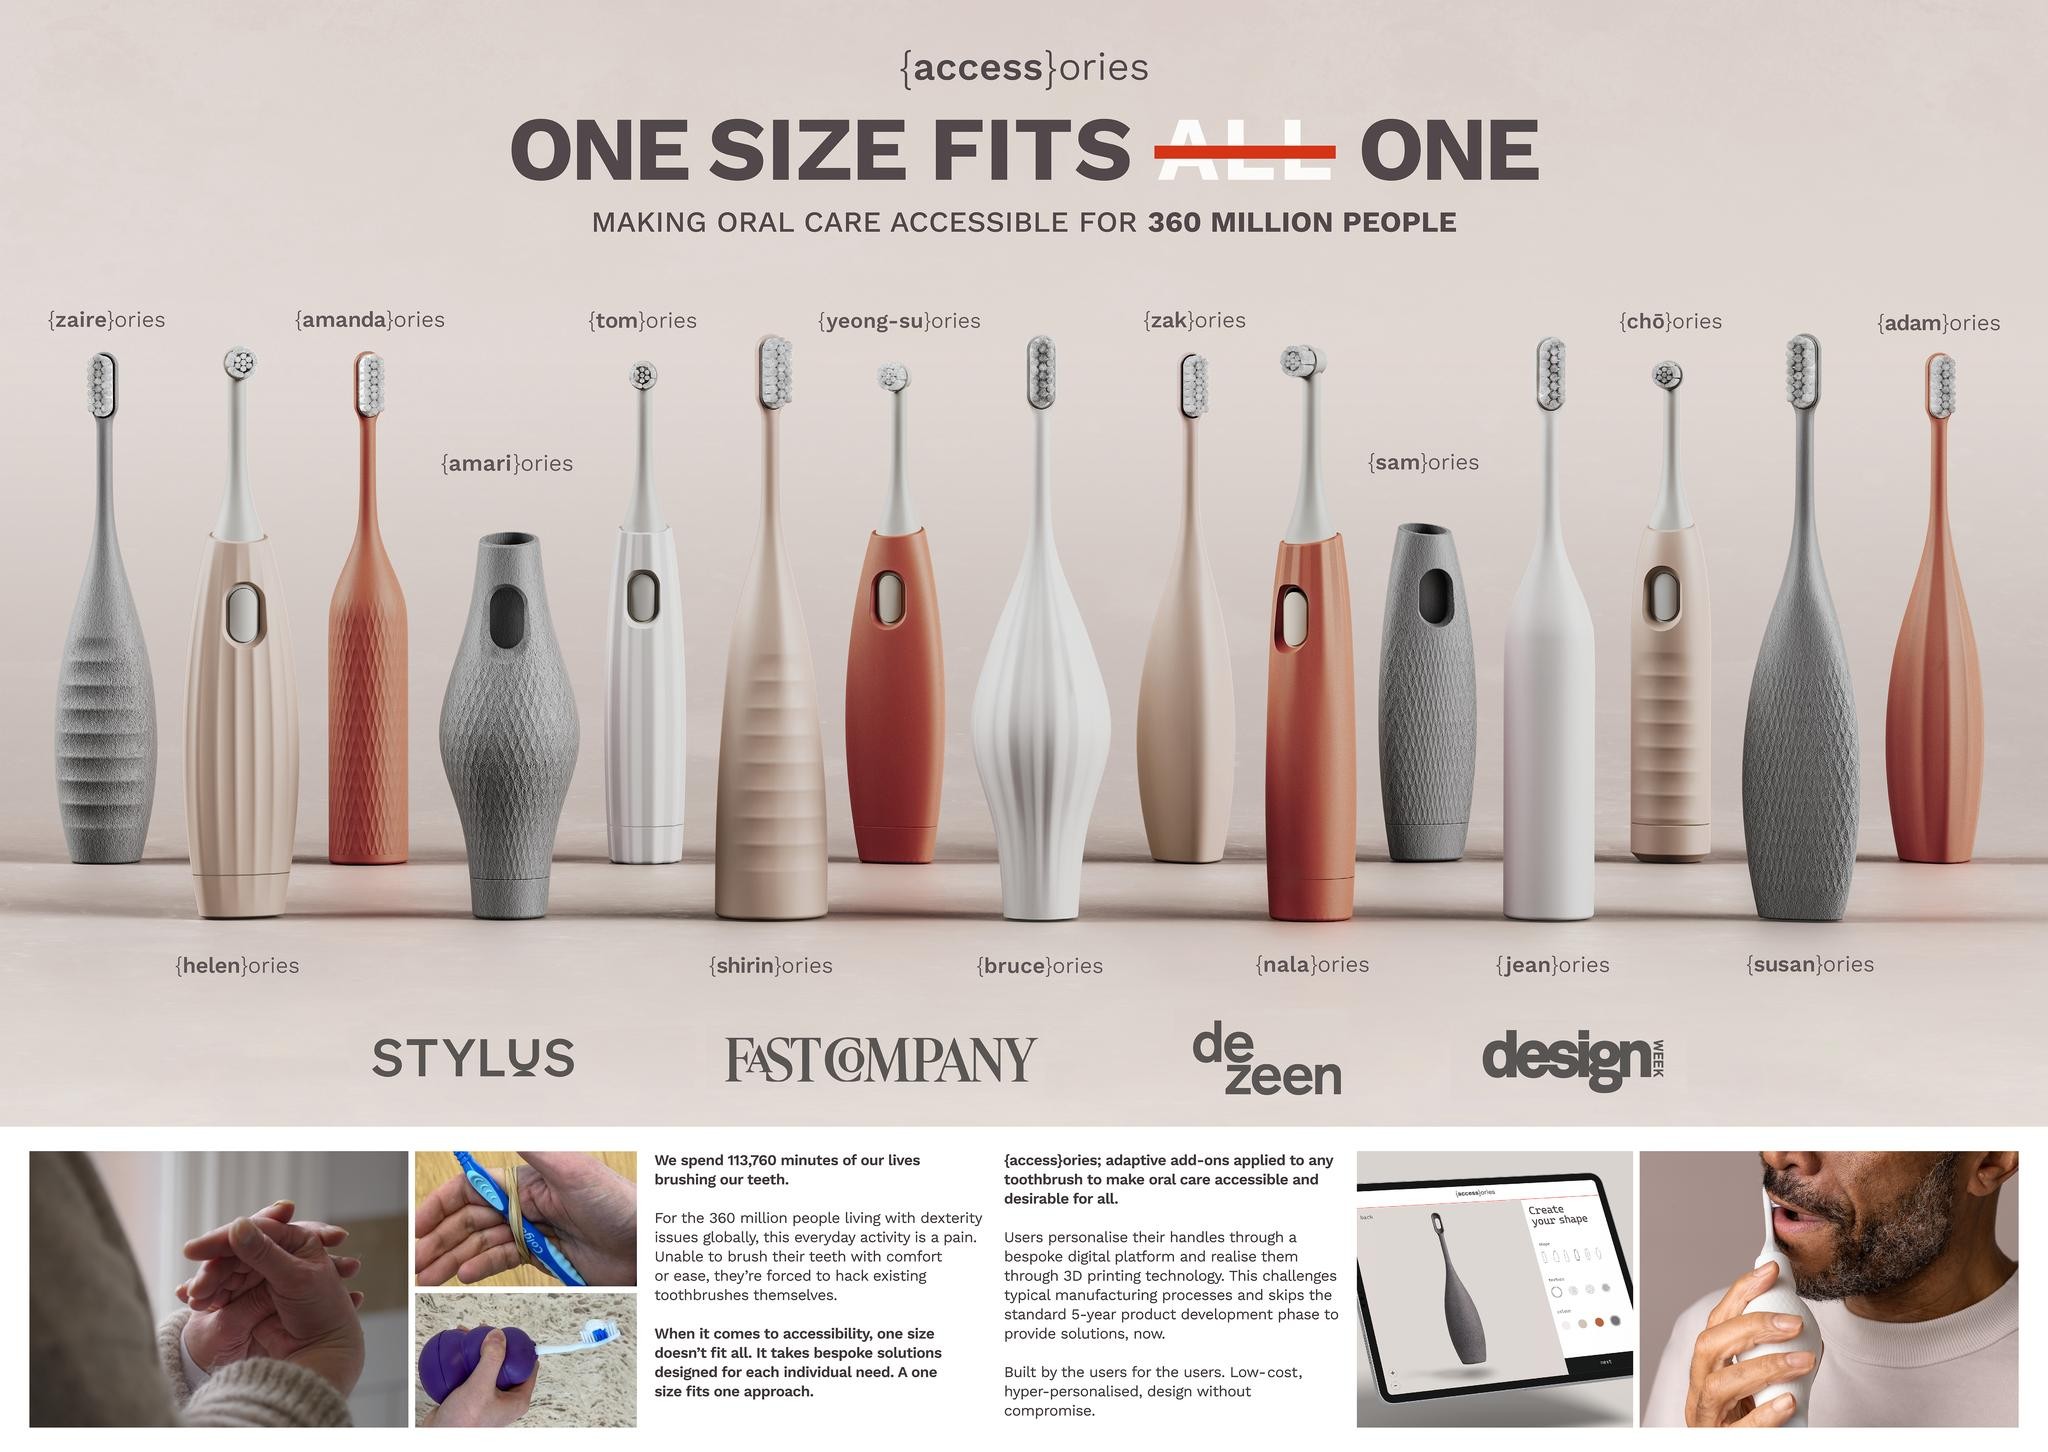 ONE SIZE FITS ONE - MAKING ORAL CARE ACCESSIBLE FOR 360 MILLION PEOPLE.